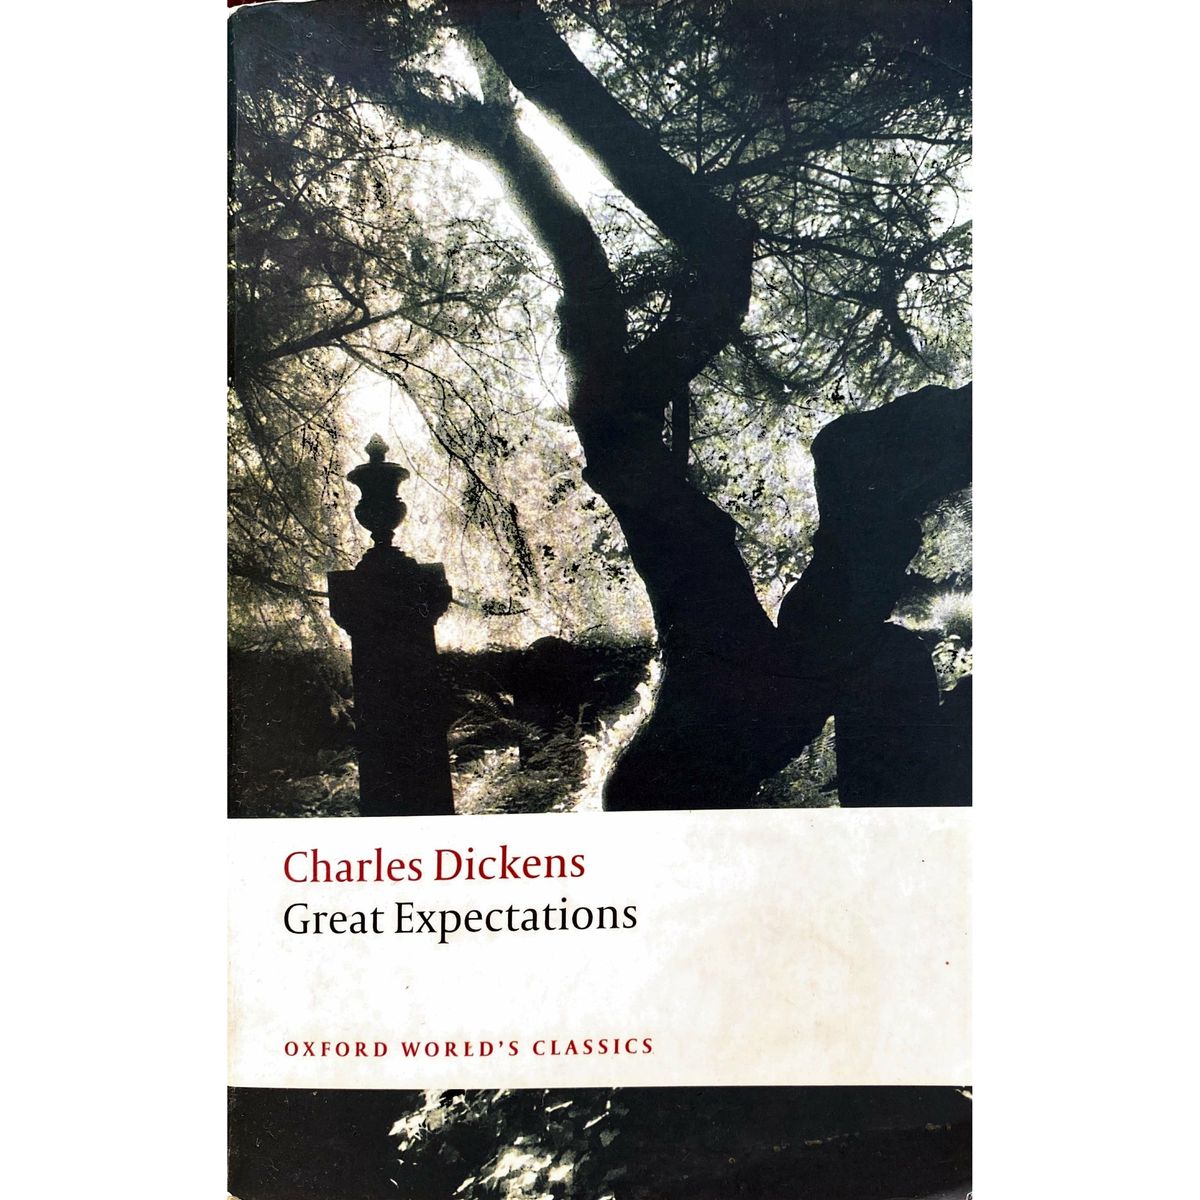 ISBN: 9780199219766 / 0199219761 - Great Expectations by Charles Dickens [2008]